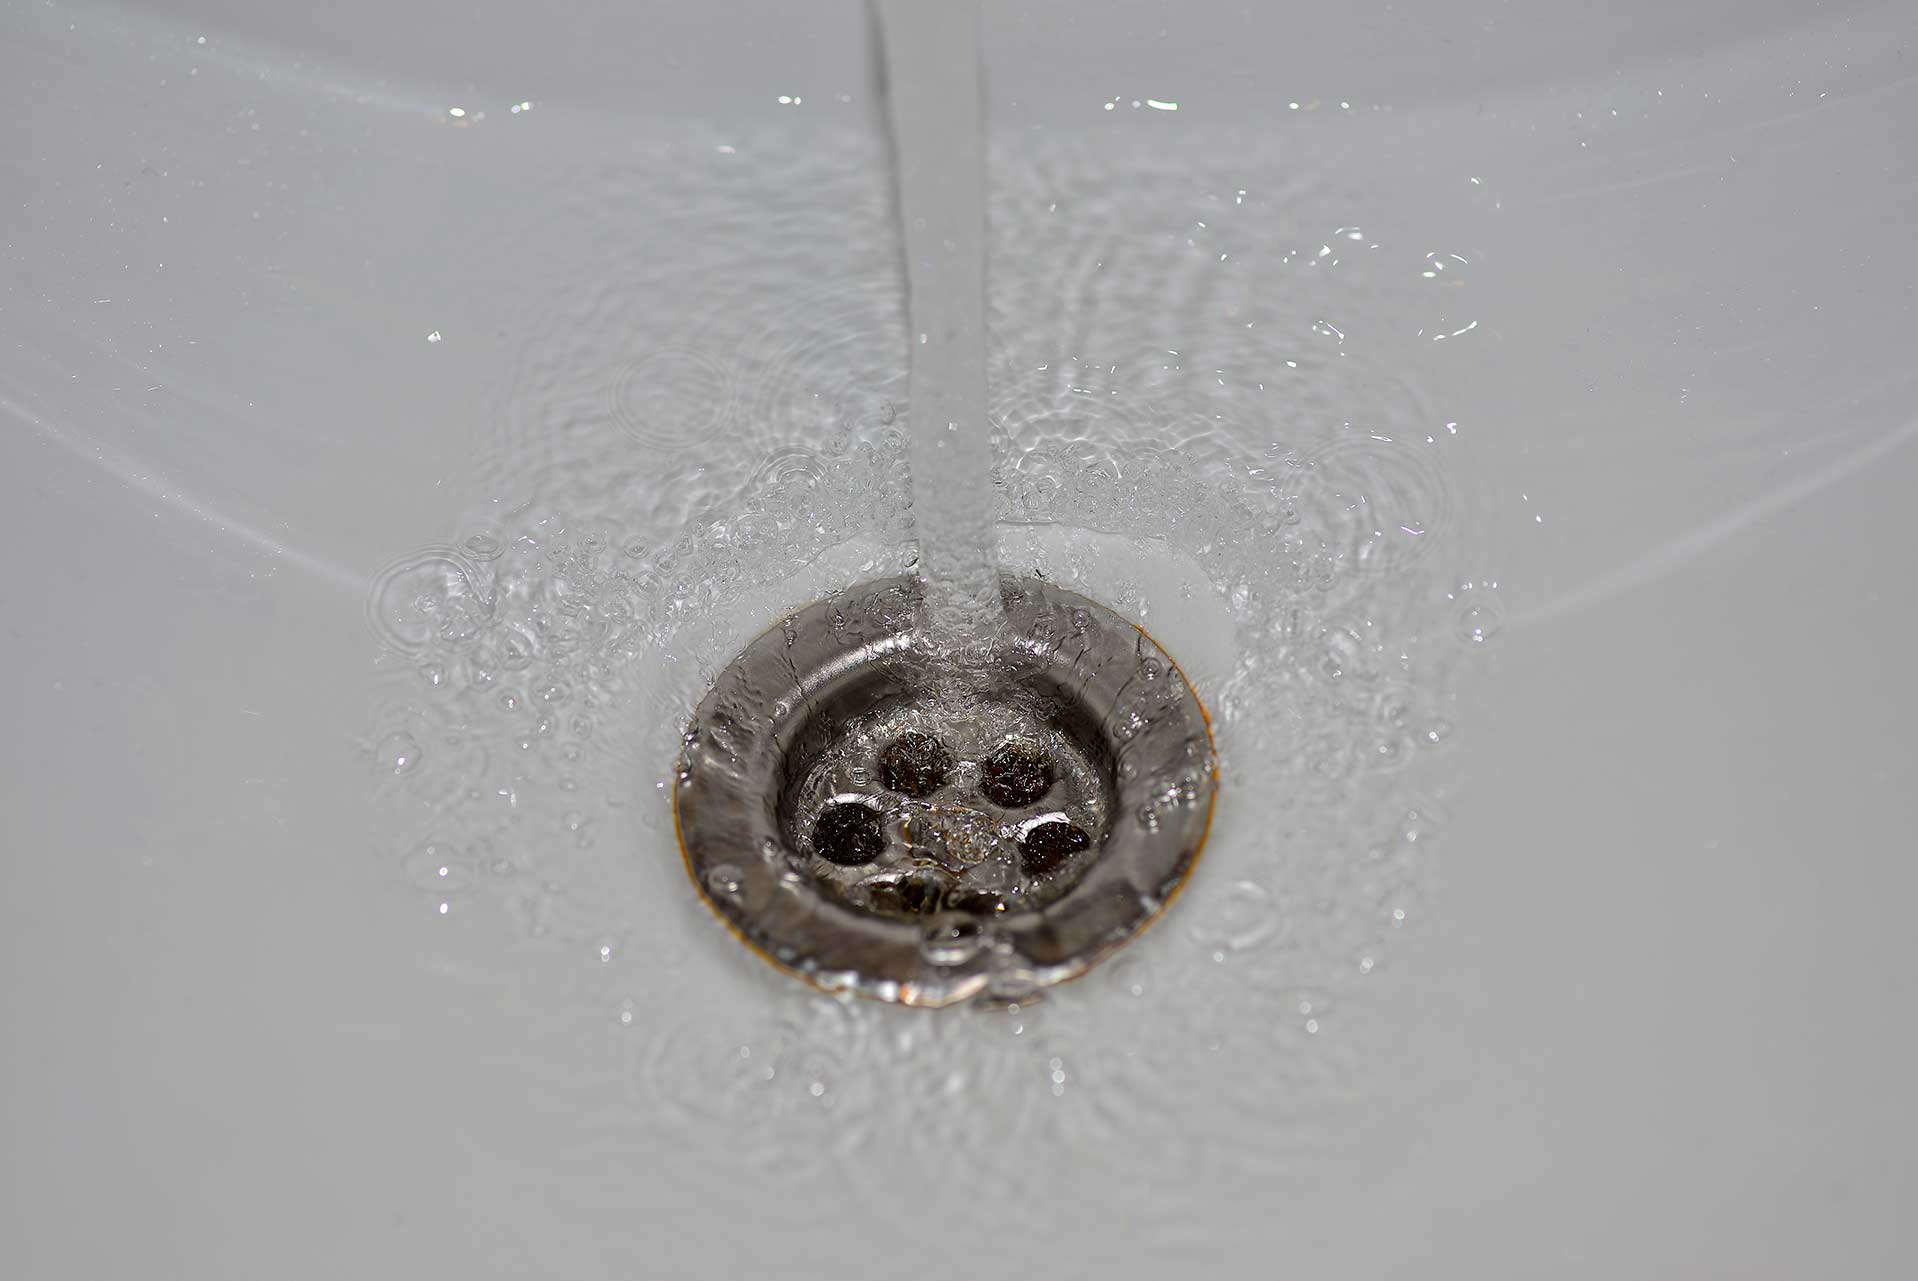 A2B Drains provides services to unblock blocked sinks and drains for properties in Kilburn.